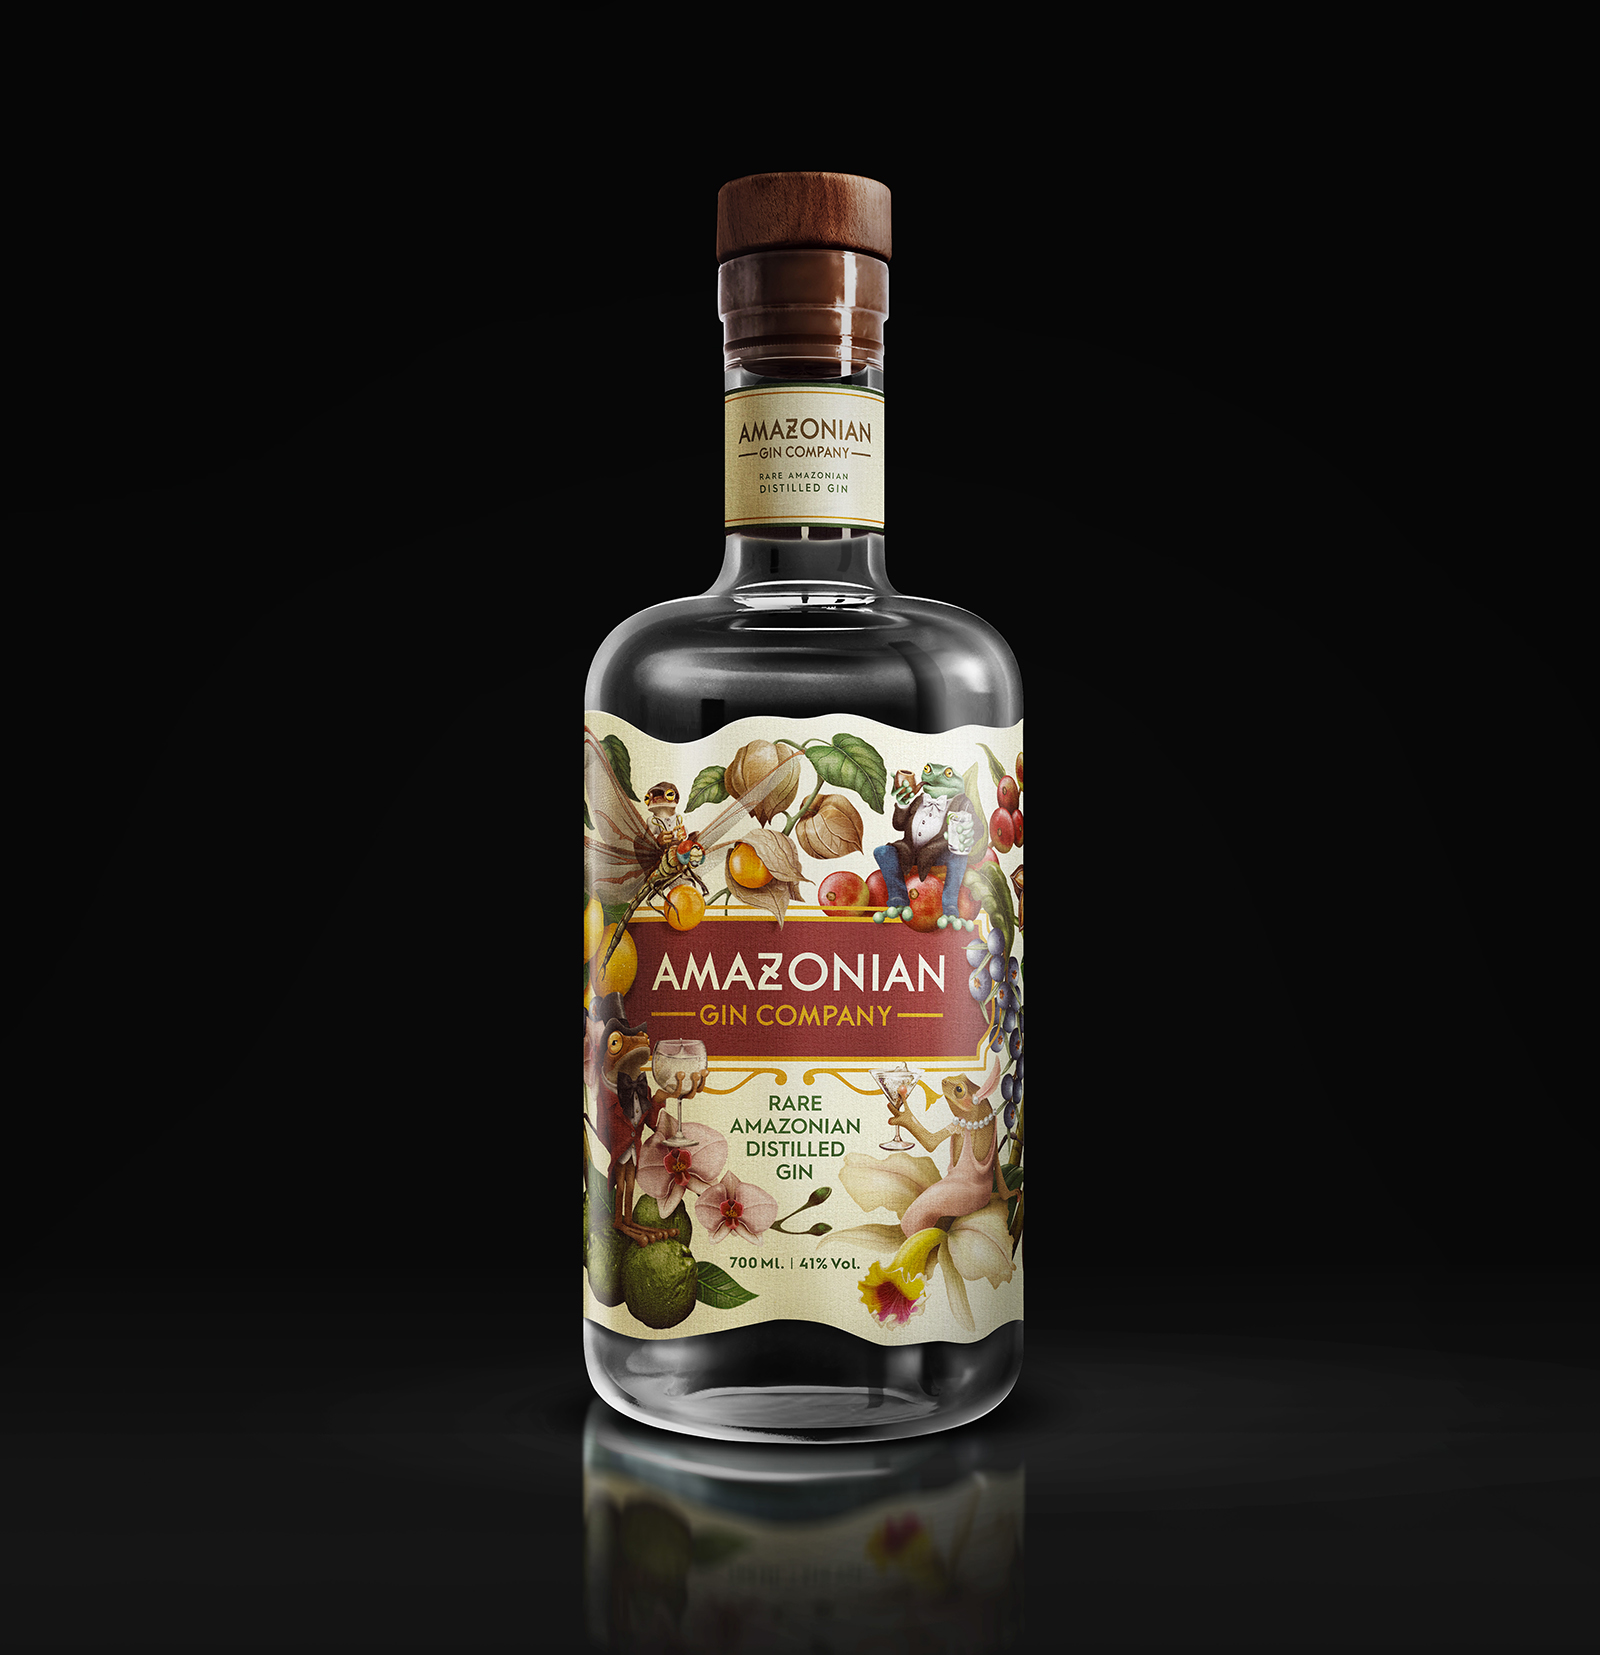 First Distilled Gin with Amazonian Fruits Features Unique Label Design